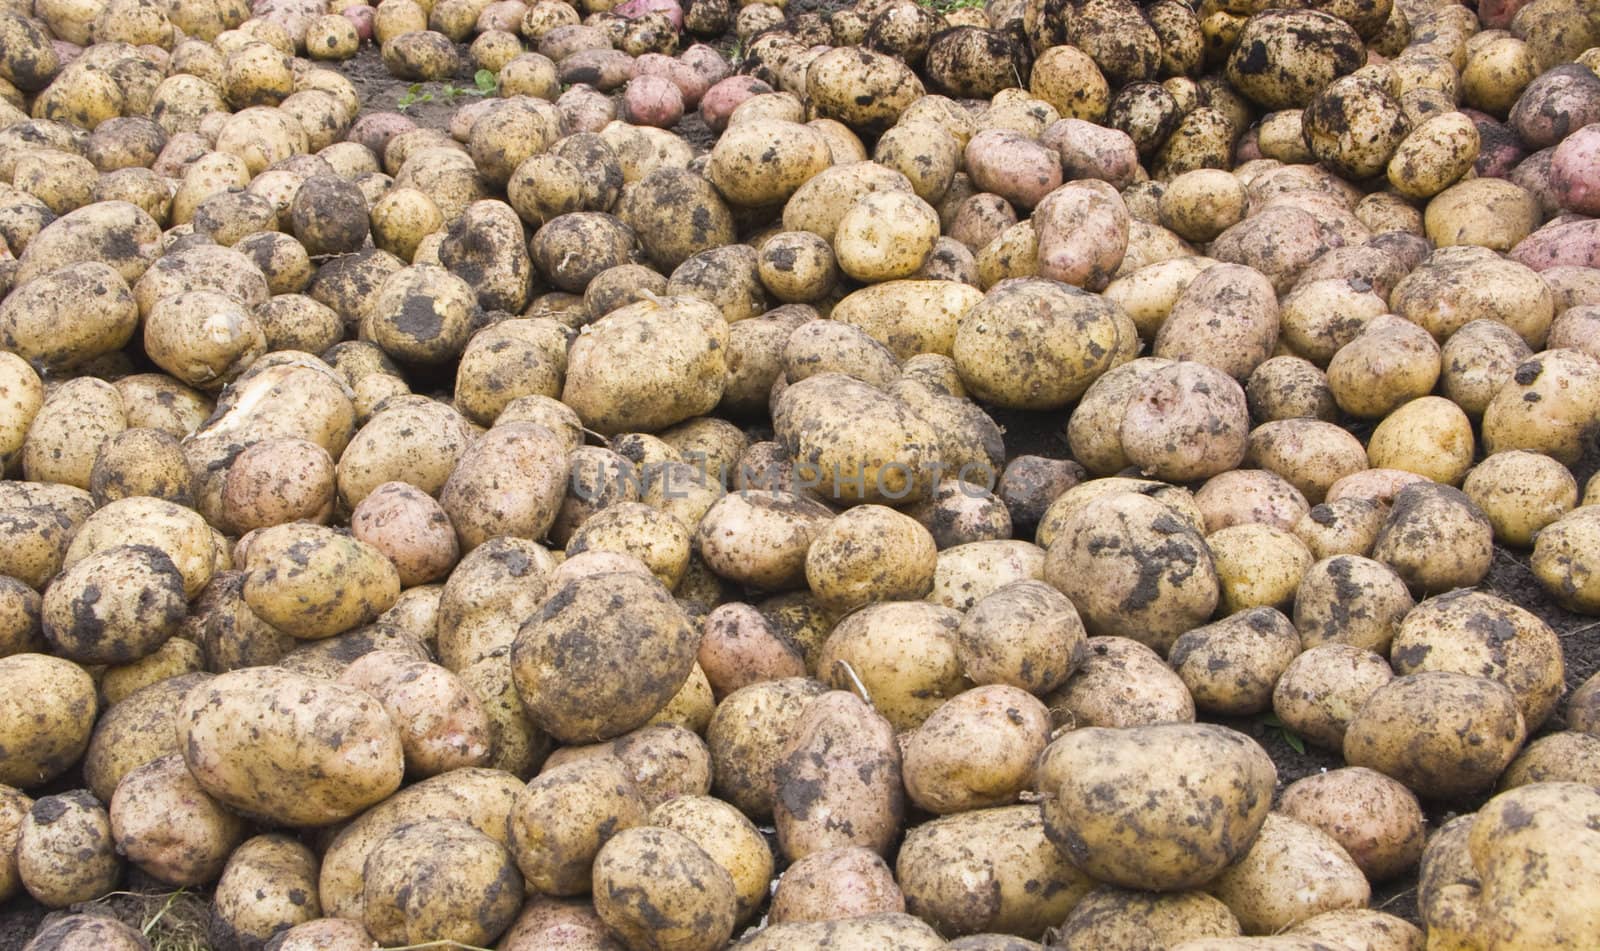  The image of the potato scattered by the ground